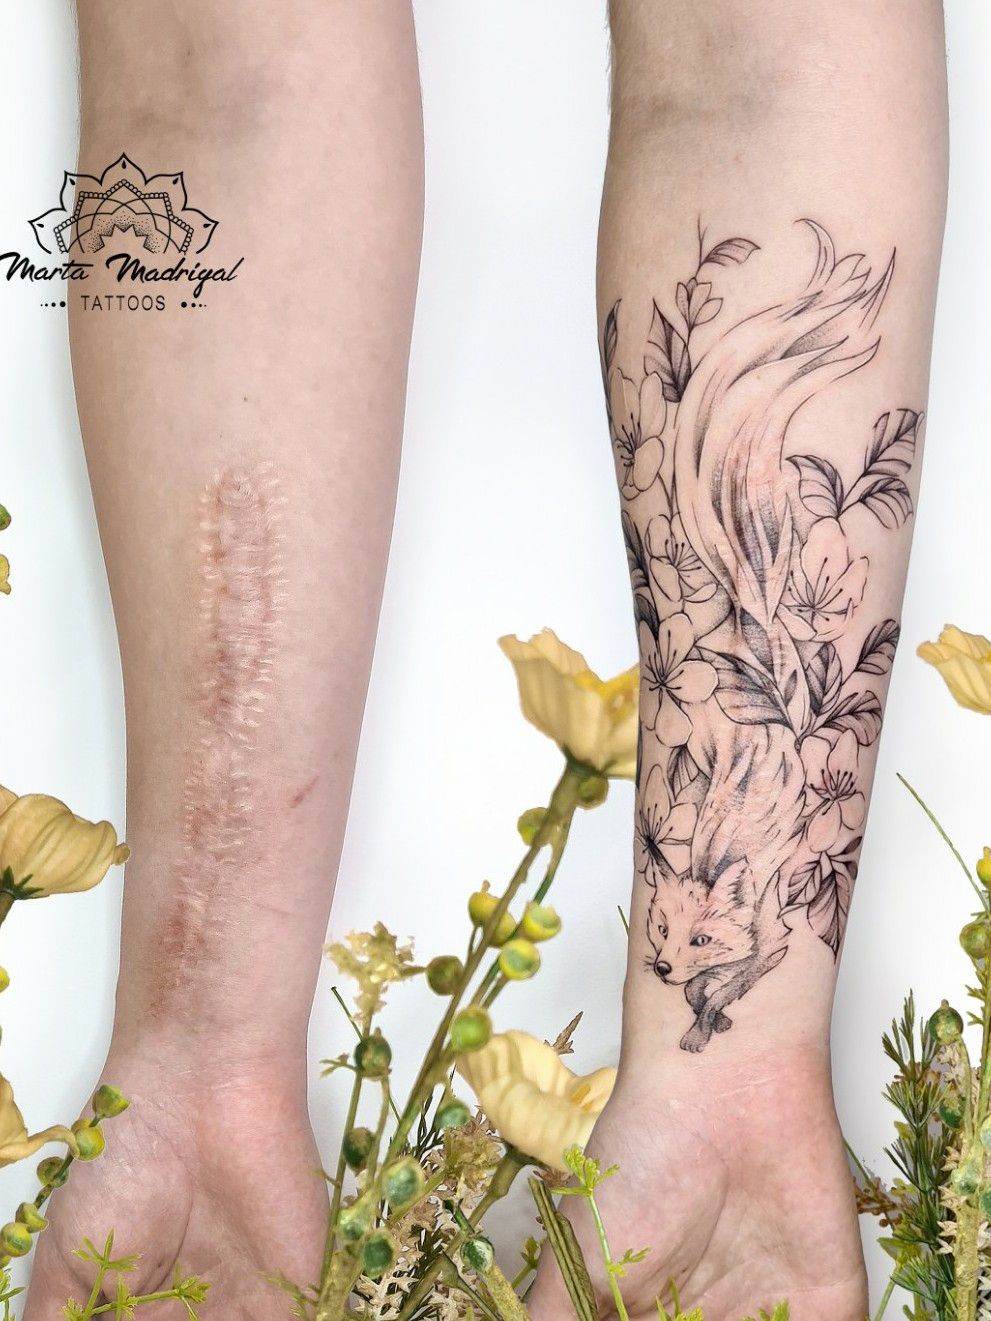 Clever tattoo designs that turn scars into beautiful works of art